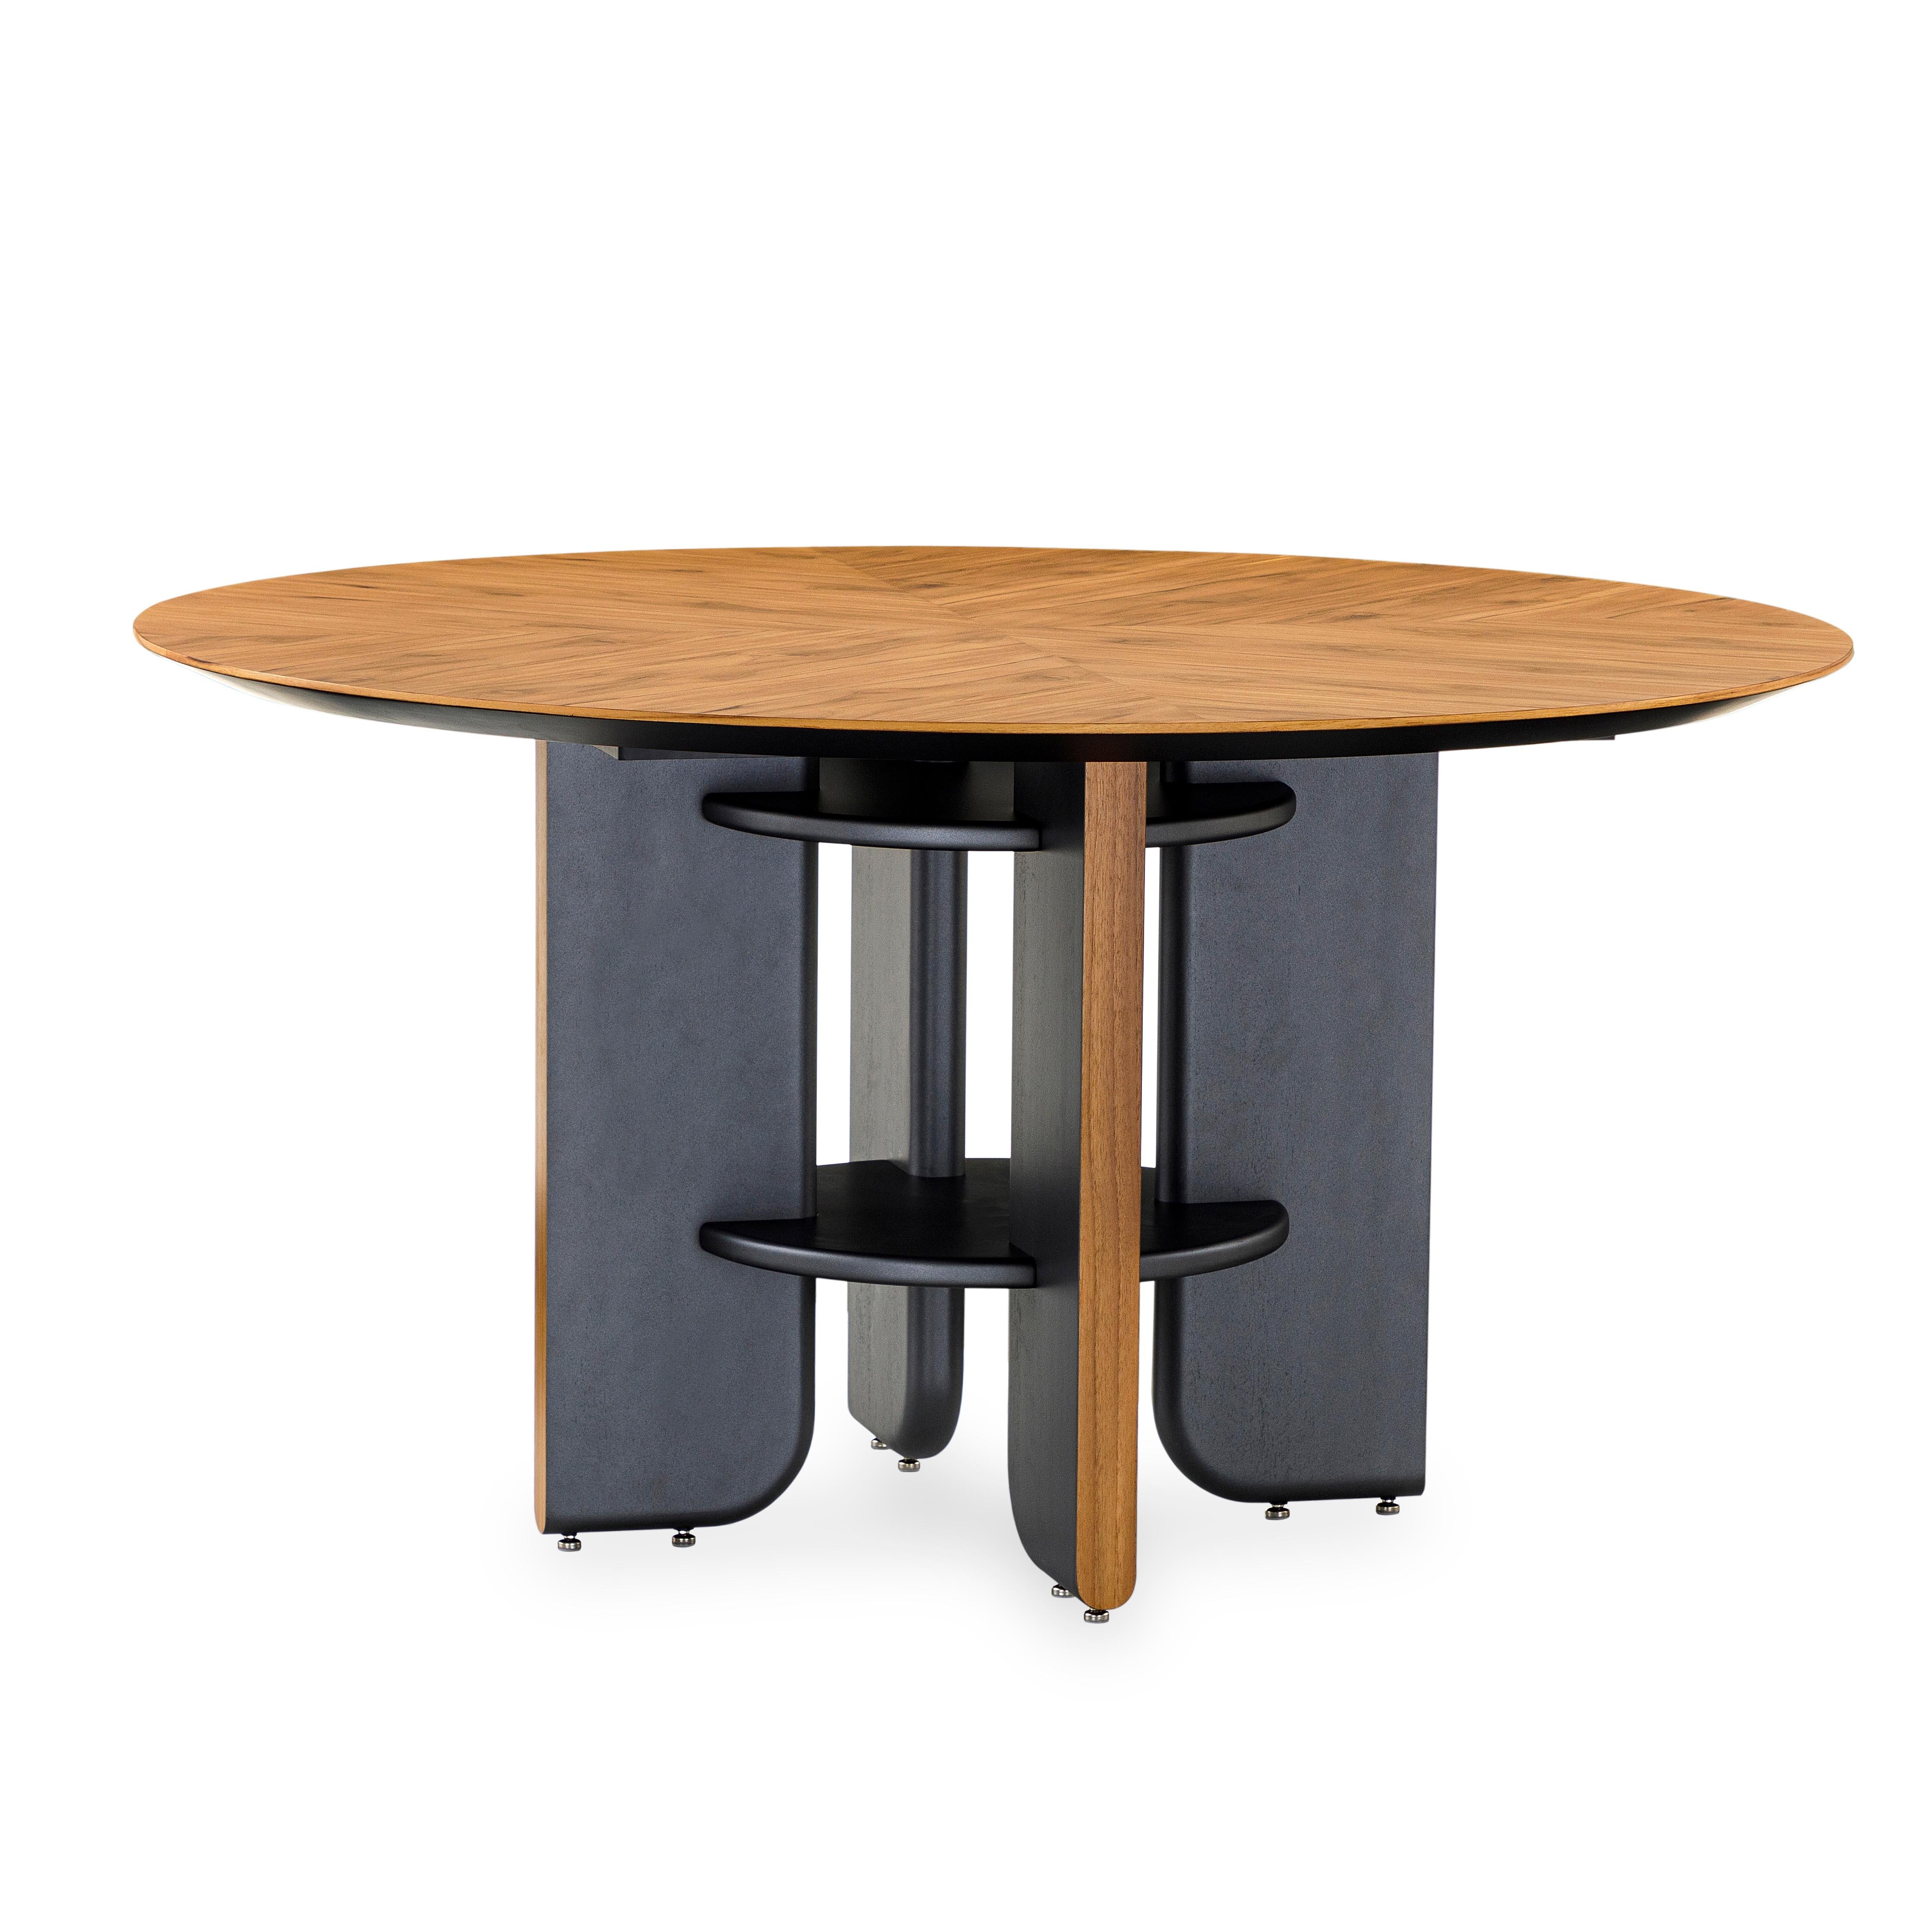 This round dining table in a teak veneered top finish with black wood legs is the perfect table for your house. Every dining space needs a good dining table and the Moon round table is going to be perfect for that space, with an exclusive design and